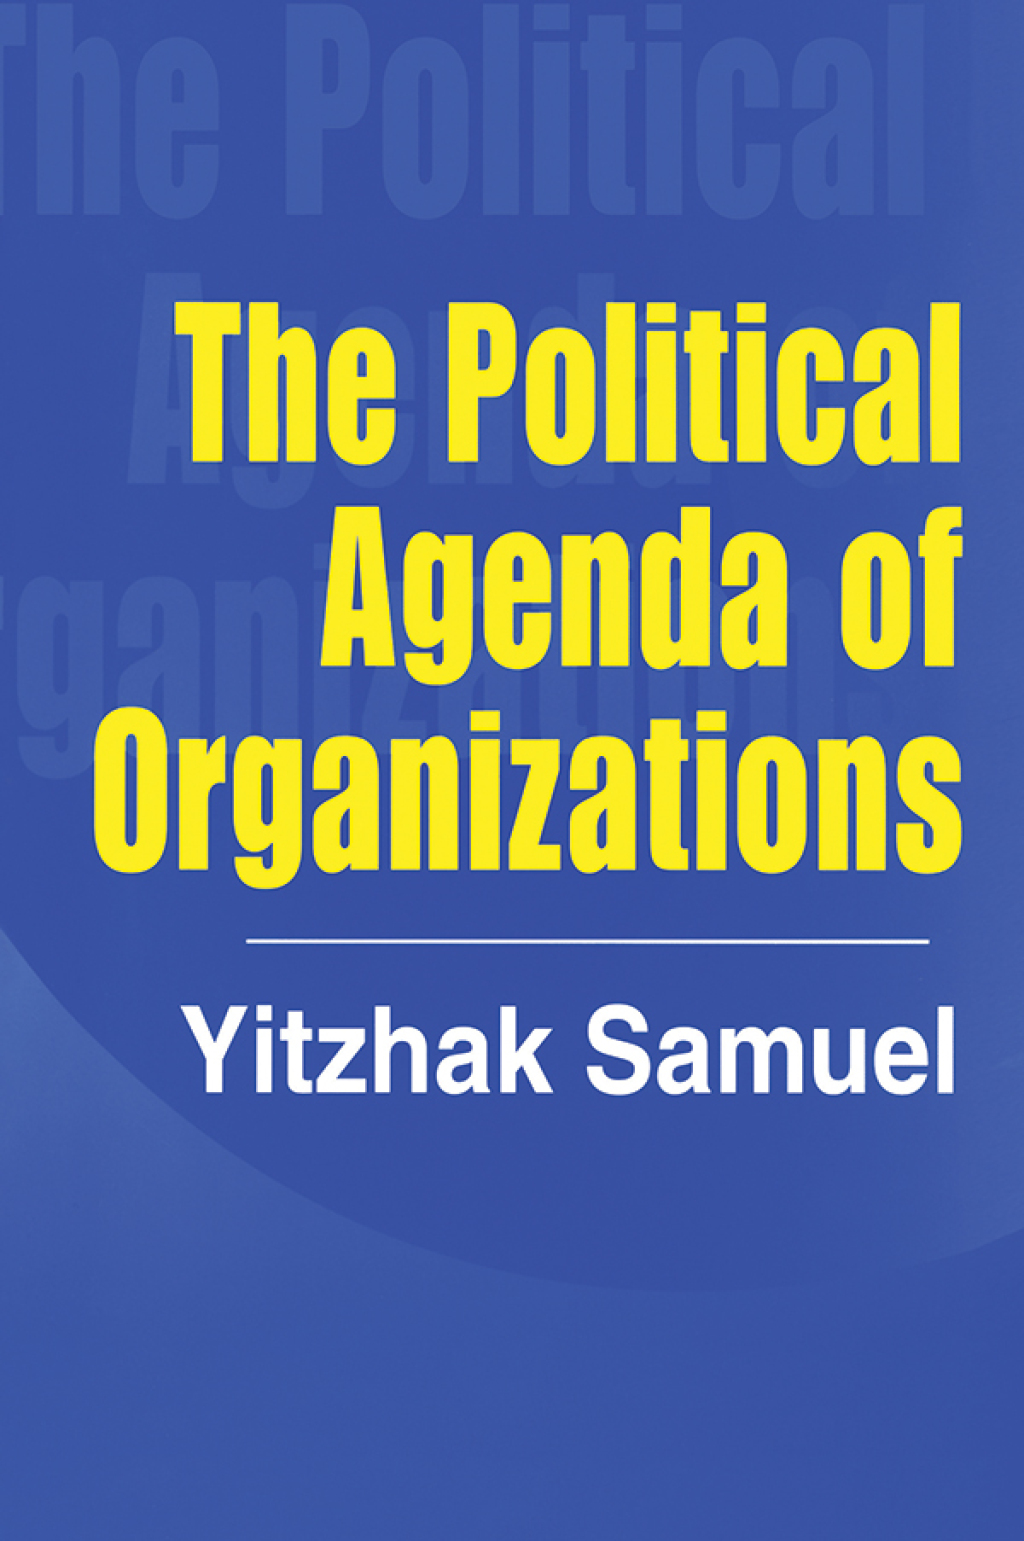 ISBN 9780765802606 product image for The Political Agenda of Organizations - 1st Edition (eBook Rental) | upcitemdb.com